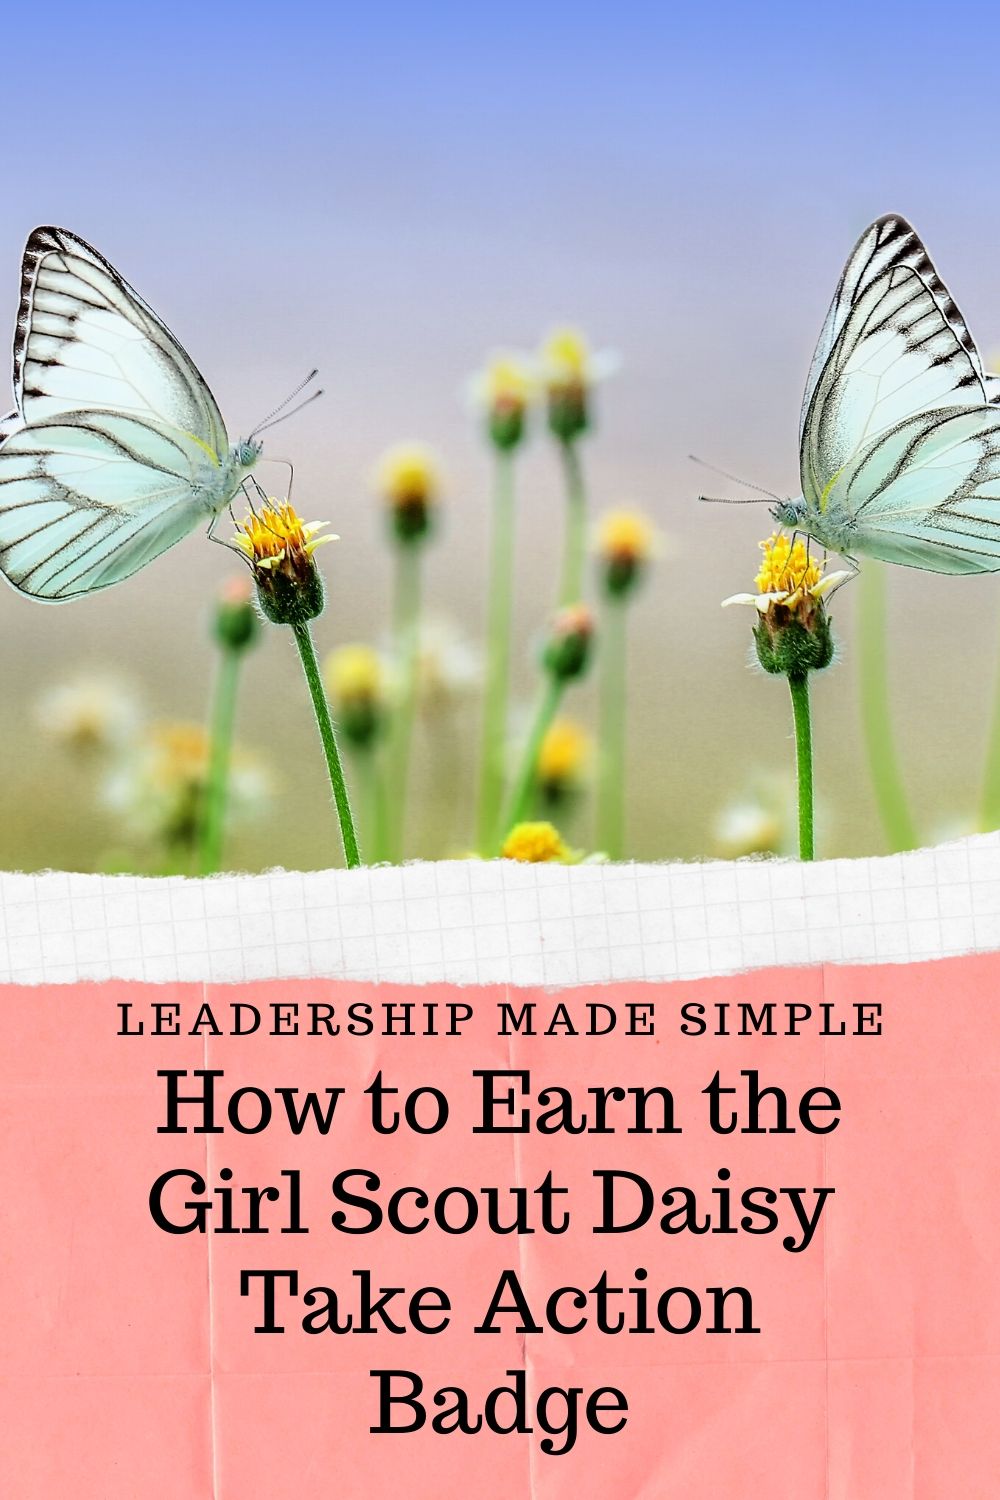 daisy outdoor journey take action project ideas